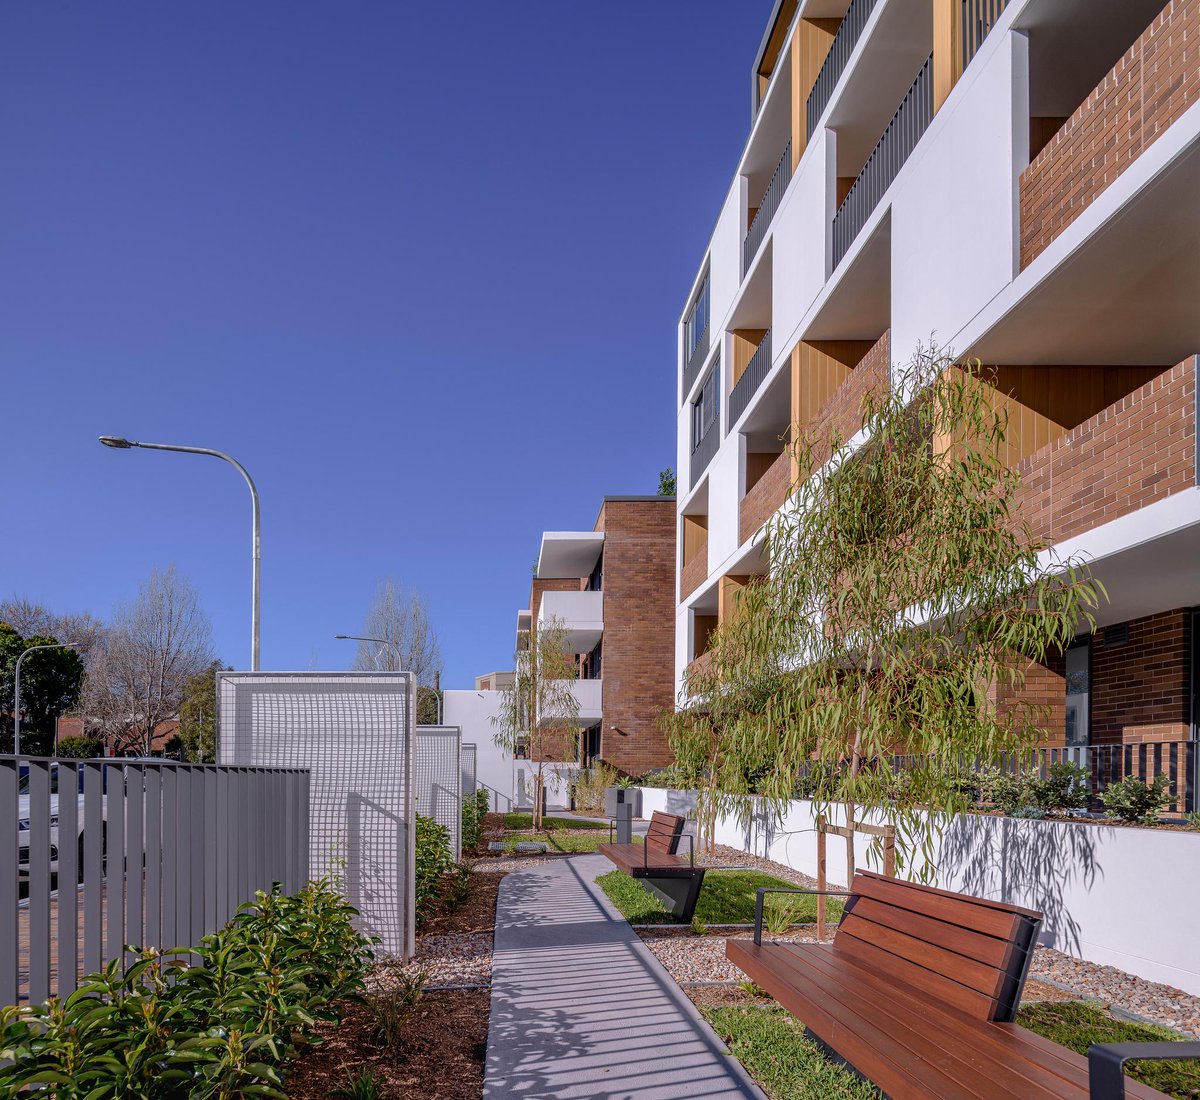 Thanks @landcomplaces Board, Leadership & Build-to-rent team for touring our Blackwattle & Ironbark #AffordableHousing apartments
Great to talk about design/operation of affordable #BuildToRent & increasing rental #HousingSupply. Can't wait to see Landcom deliver its BTR projects